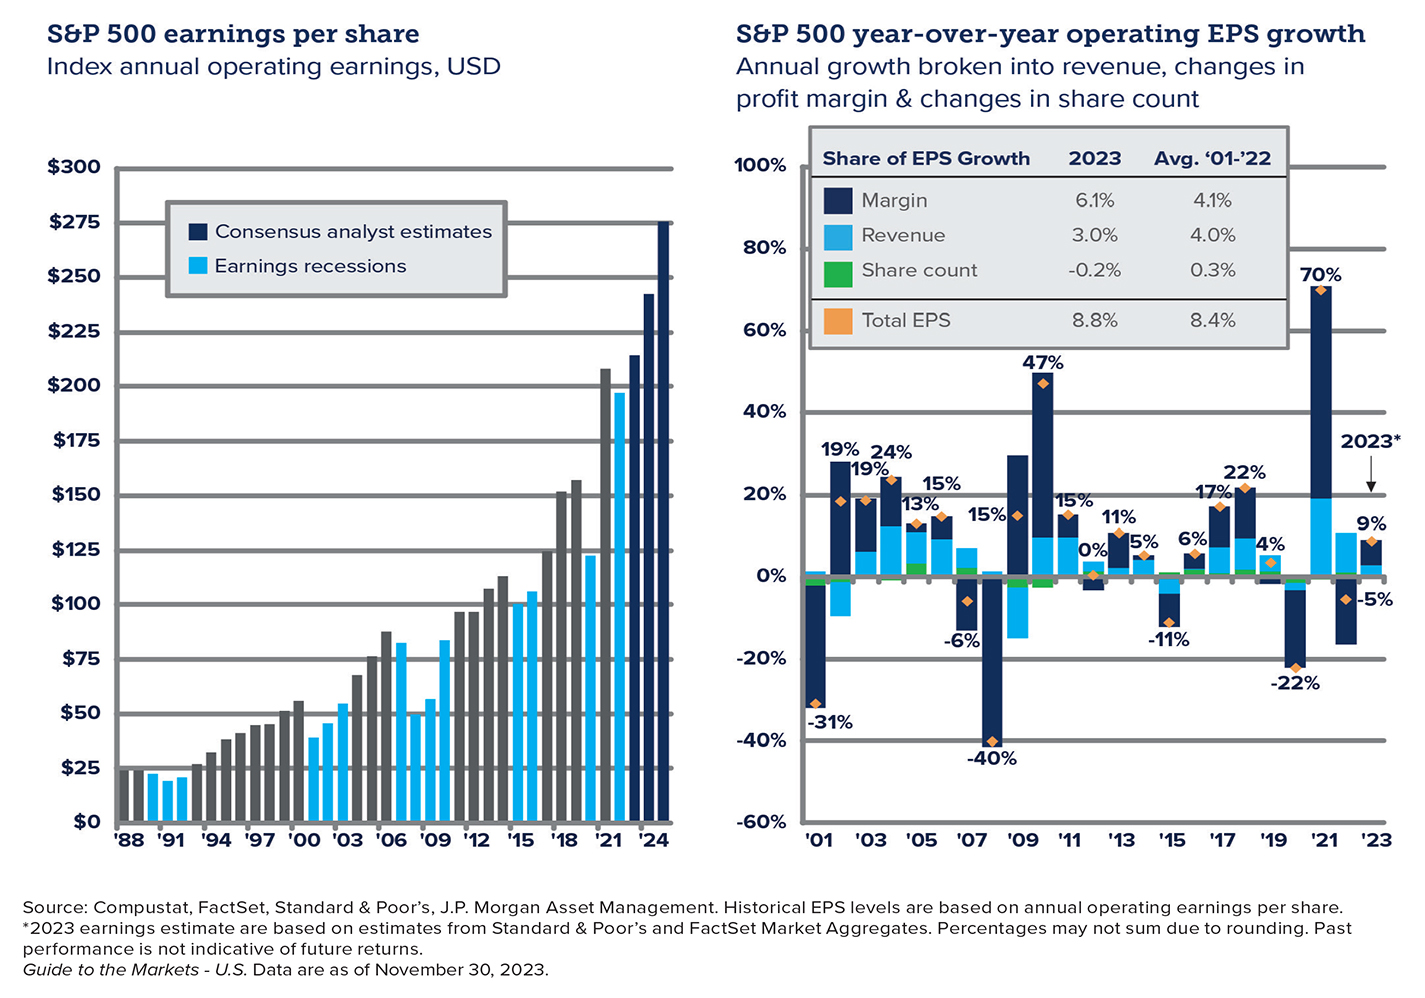 Charts showing S&P 500 earnings per share, and year-over-year operating EPS growth